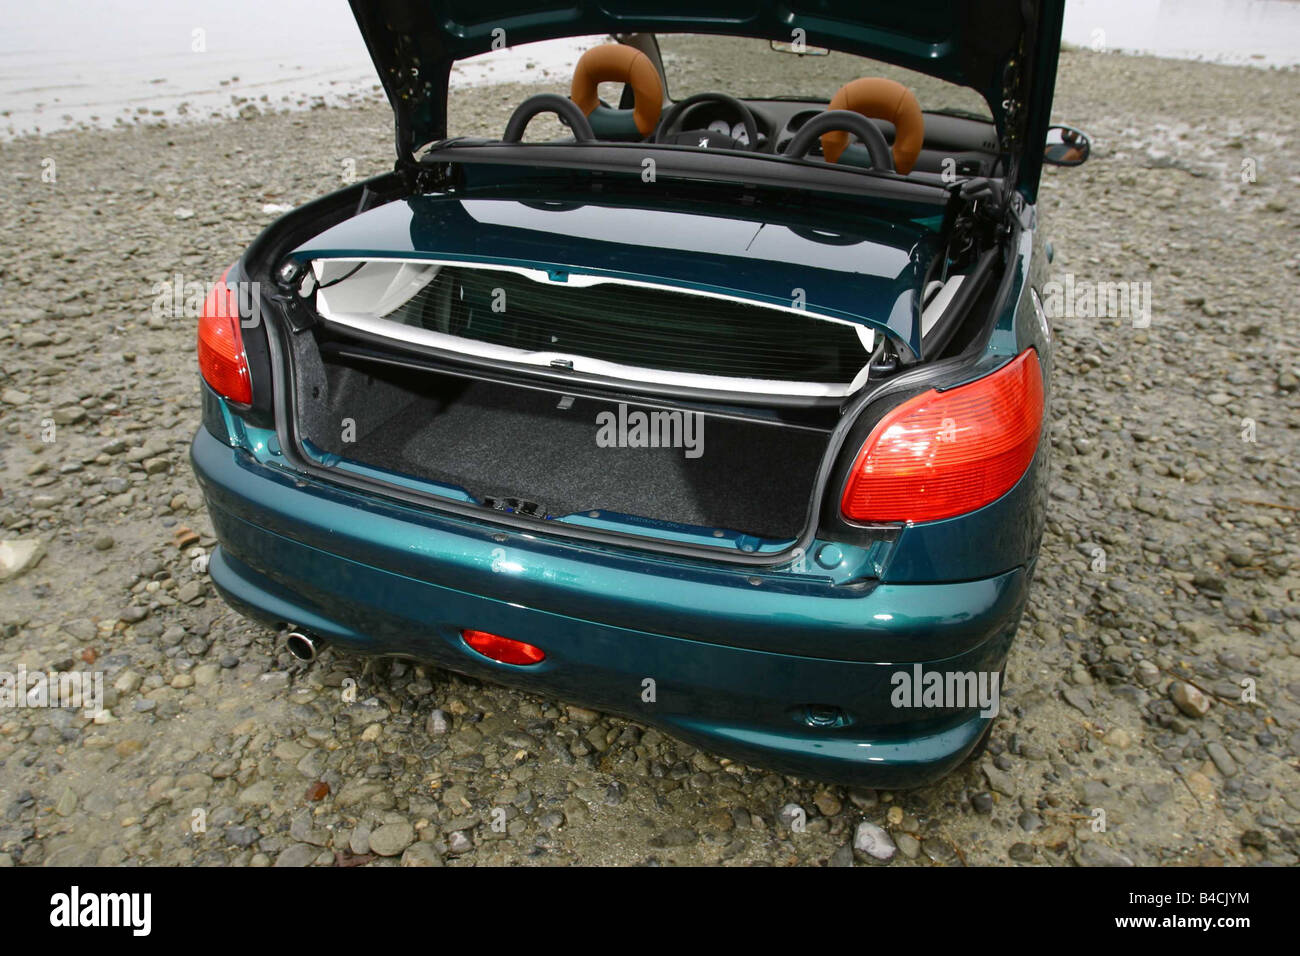 Car, Peugeot 206 CC, Convertible, model year 2000-, turquoise/green, open top, view into boot, technique/accessory, accessories Stock Photo